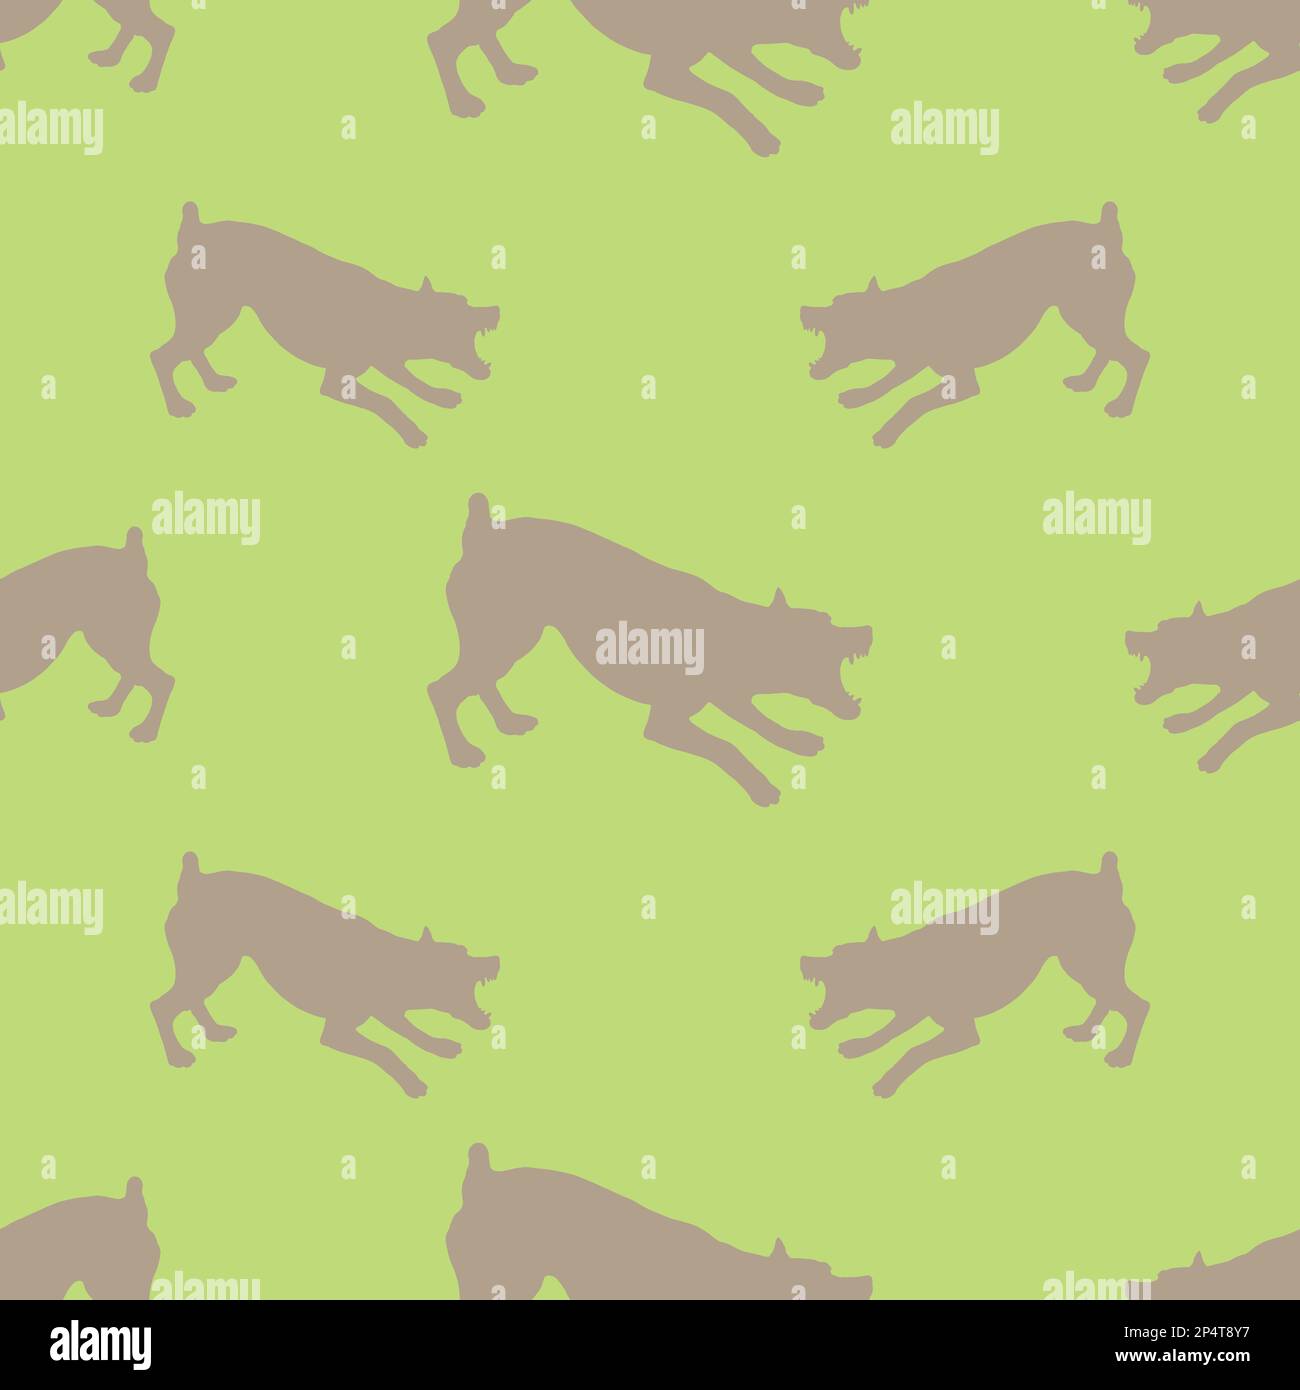 Agressive zwergpinscher puppy is attacking. Seamless pattern. Dog silhouette. Endless texture. Design for wallpaper, fabric, template, surface design. Stock Vector